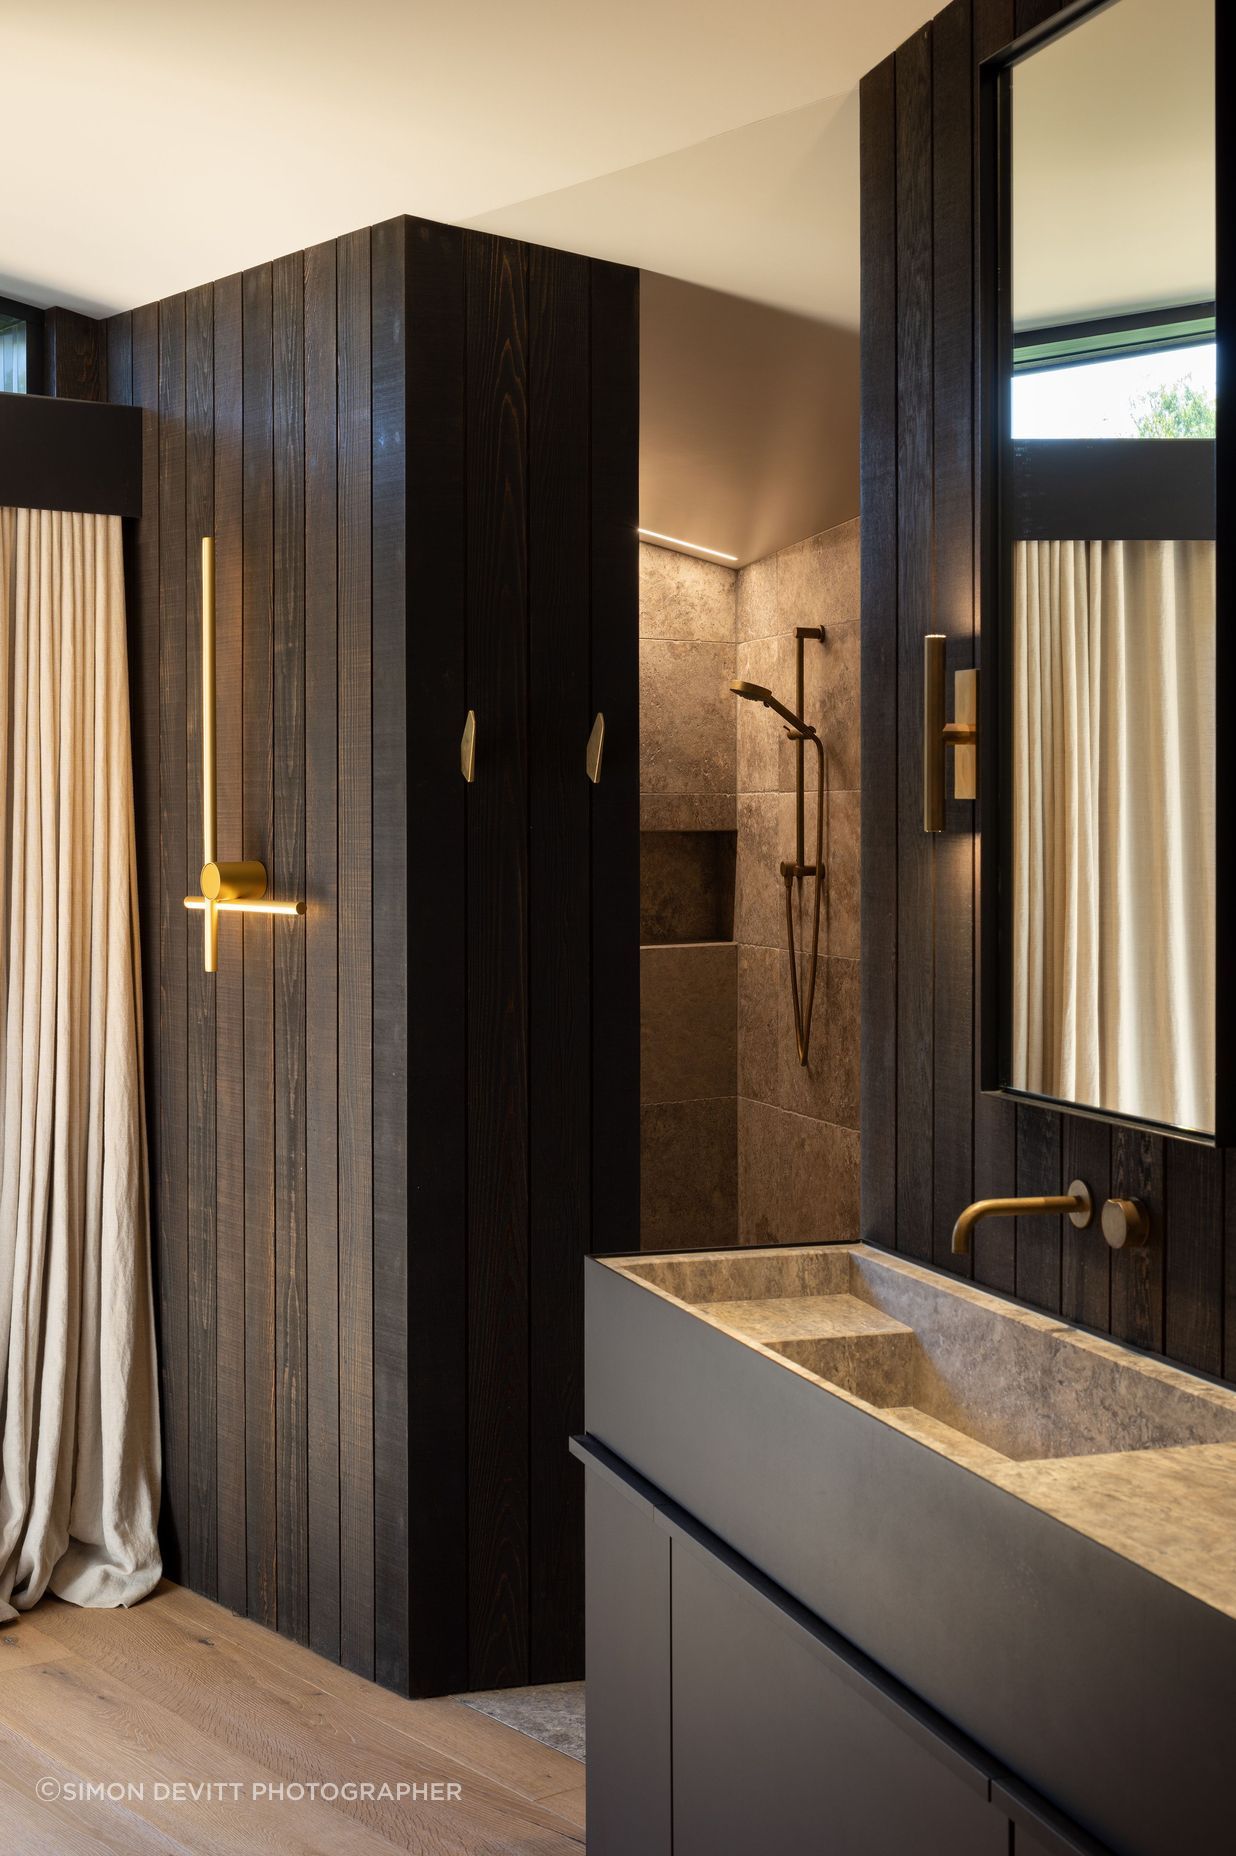 Masculine and feminine qualities work harmoniously in the en-suite